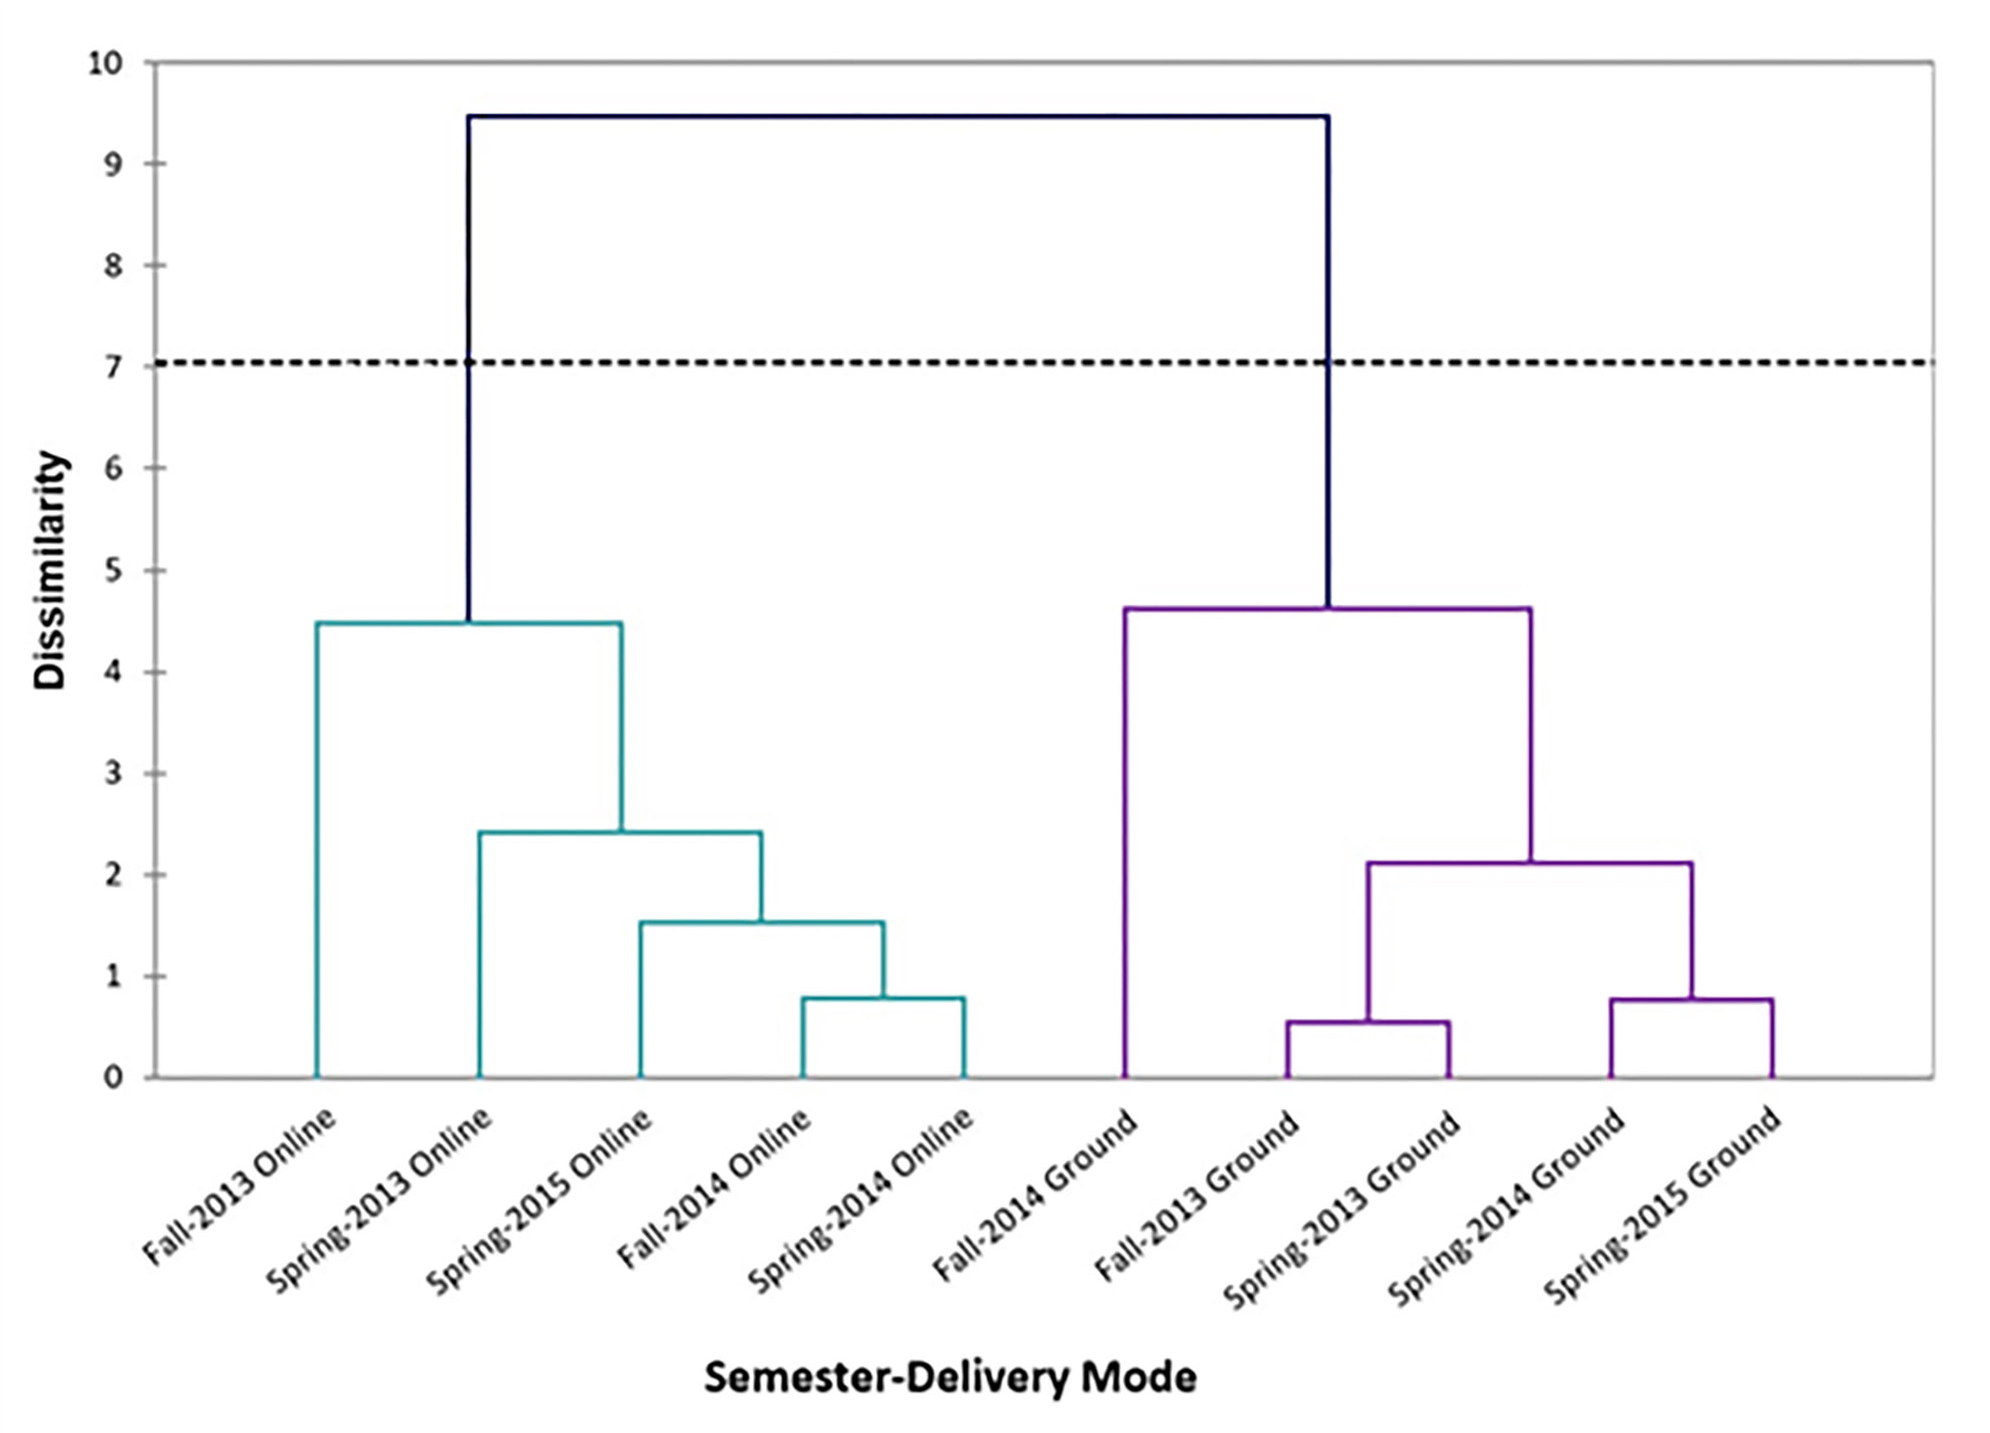 Dendrogram from a multi-varied analysis of ground and online section data throughout the study period.  Note. Data from five semesters were compared by agglomerative hierarchical cluster analysis, giving equal weights to all available variables: delivery mode, semester, CFE score, age, gender, and course grade. The dotted line indicates automatic truncation (dissimilarity: Euclidean distance; agglomeration method: unweighted pair-group average; cophenetic correlation = .871).